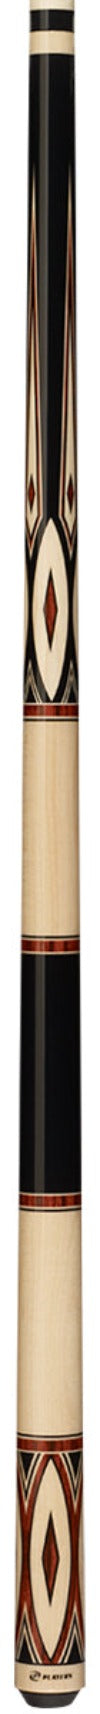 Players Players G-3394 Pool Cue Pool Cue